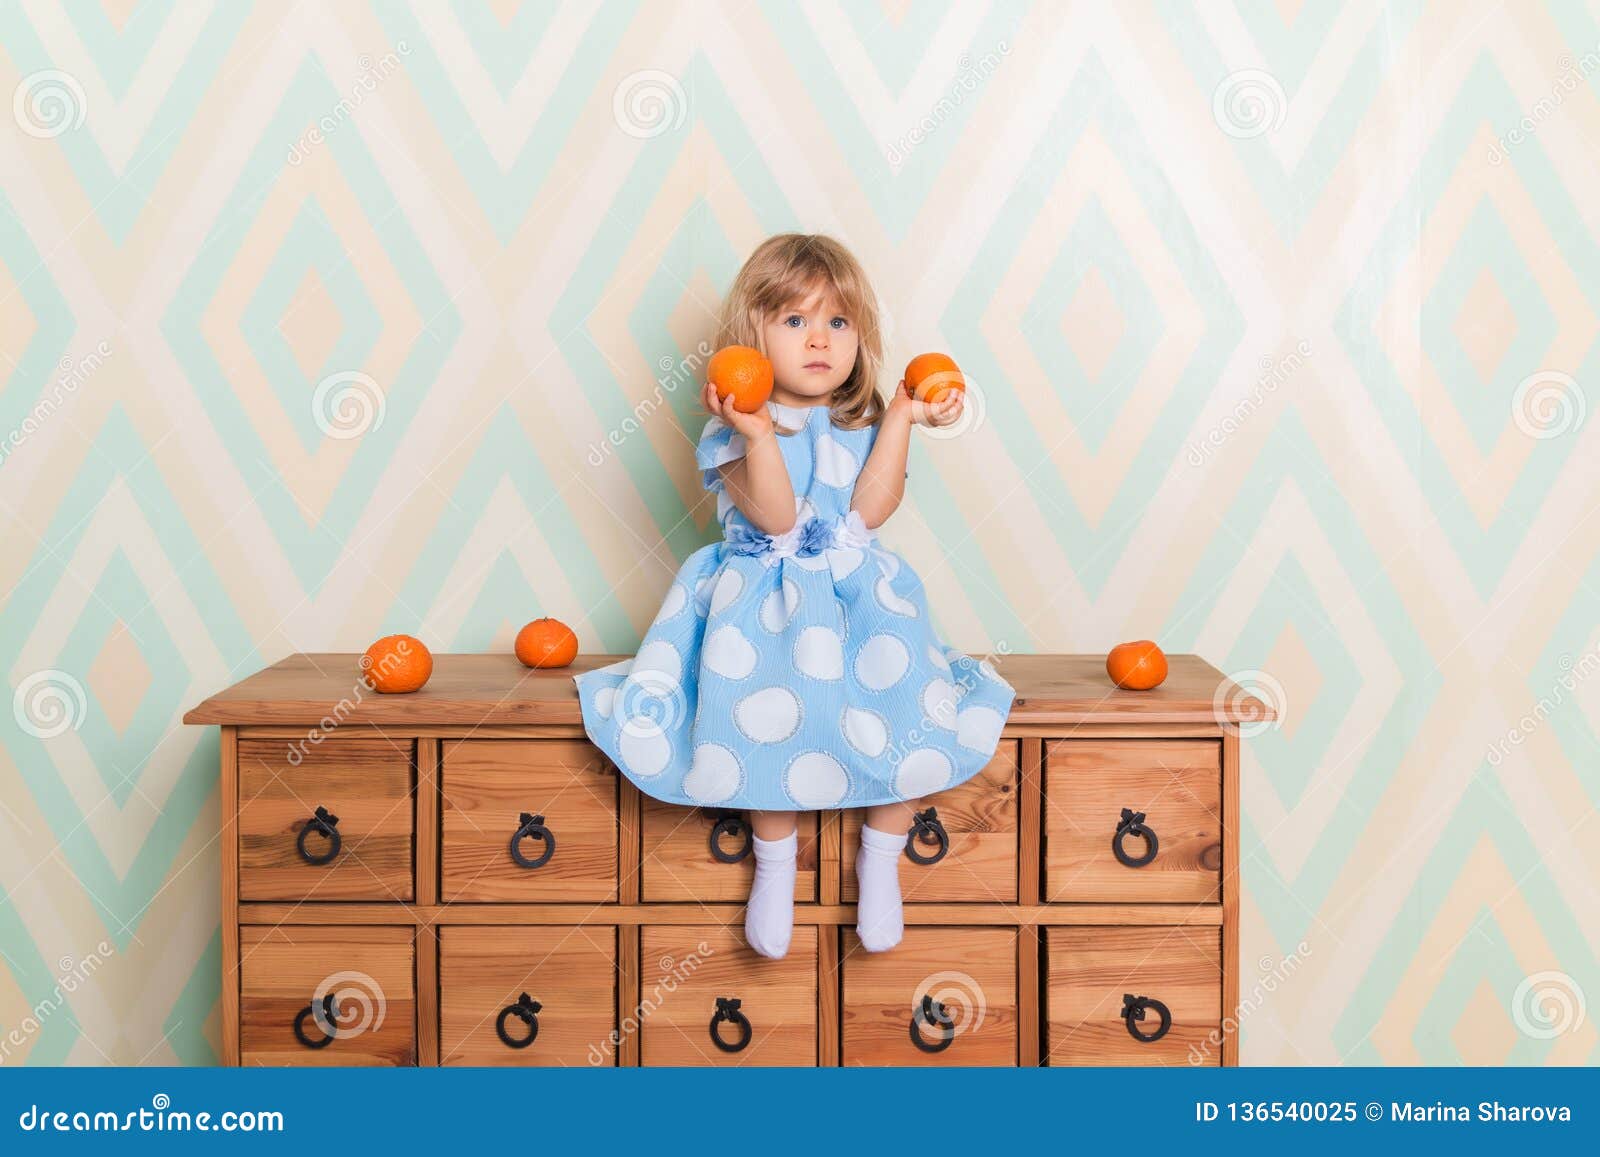 Toddler Child Baby Girl In Light Blue Dress Seriously Sitting On